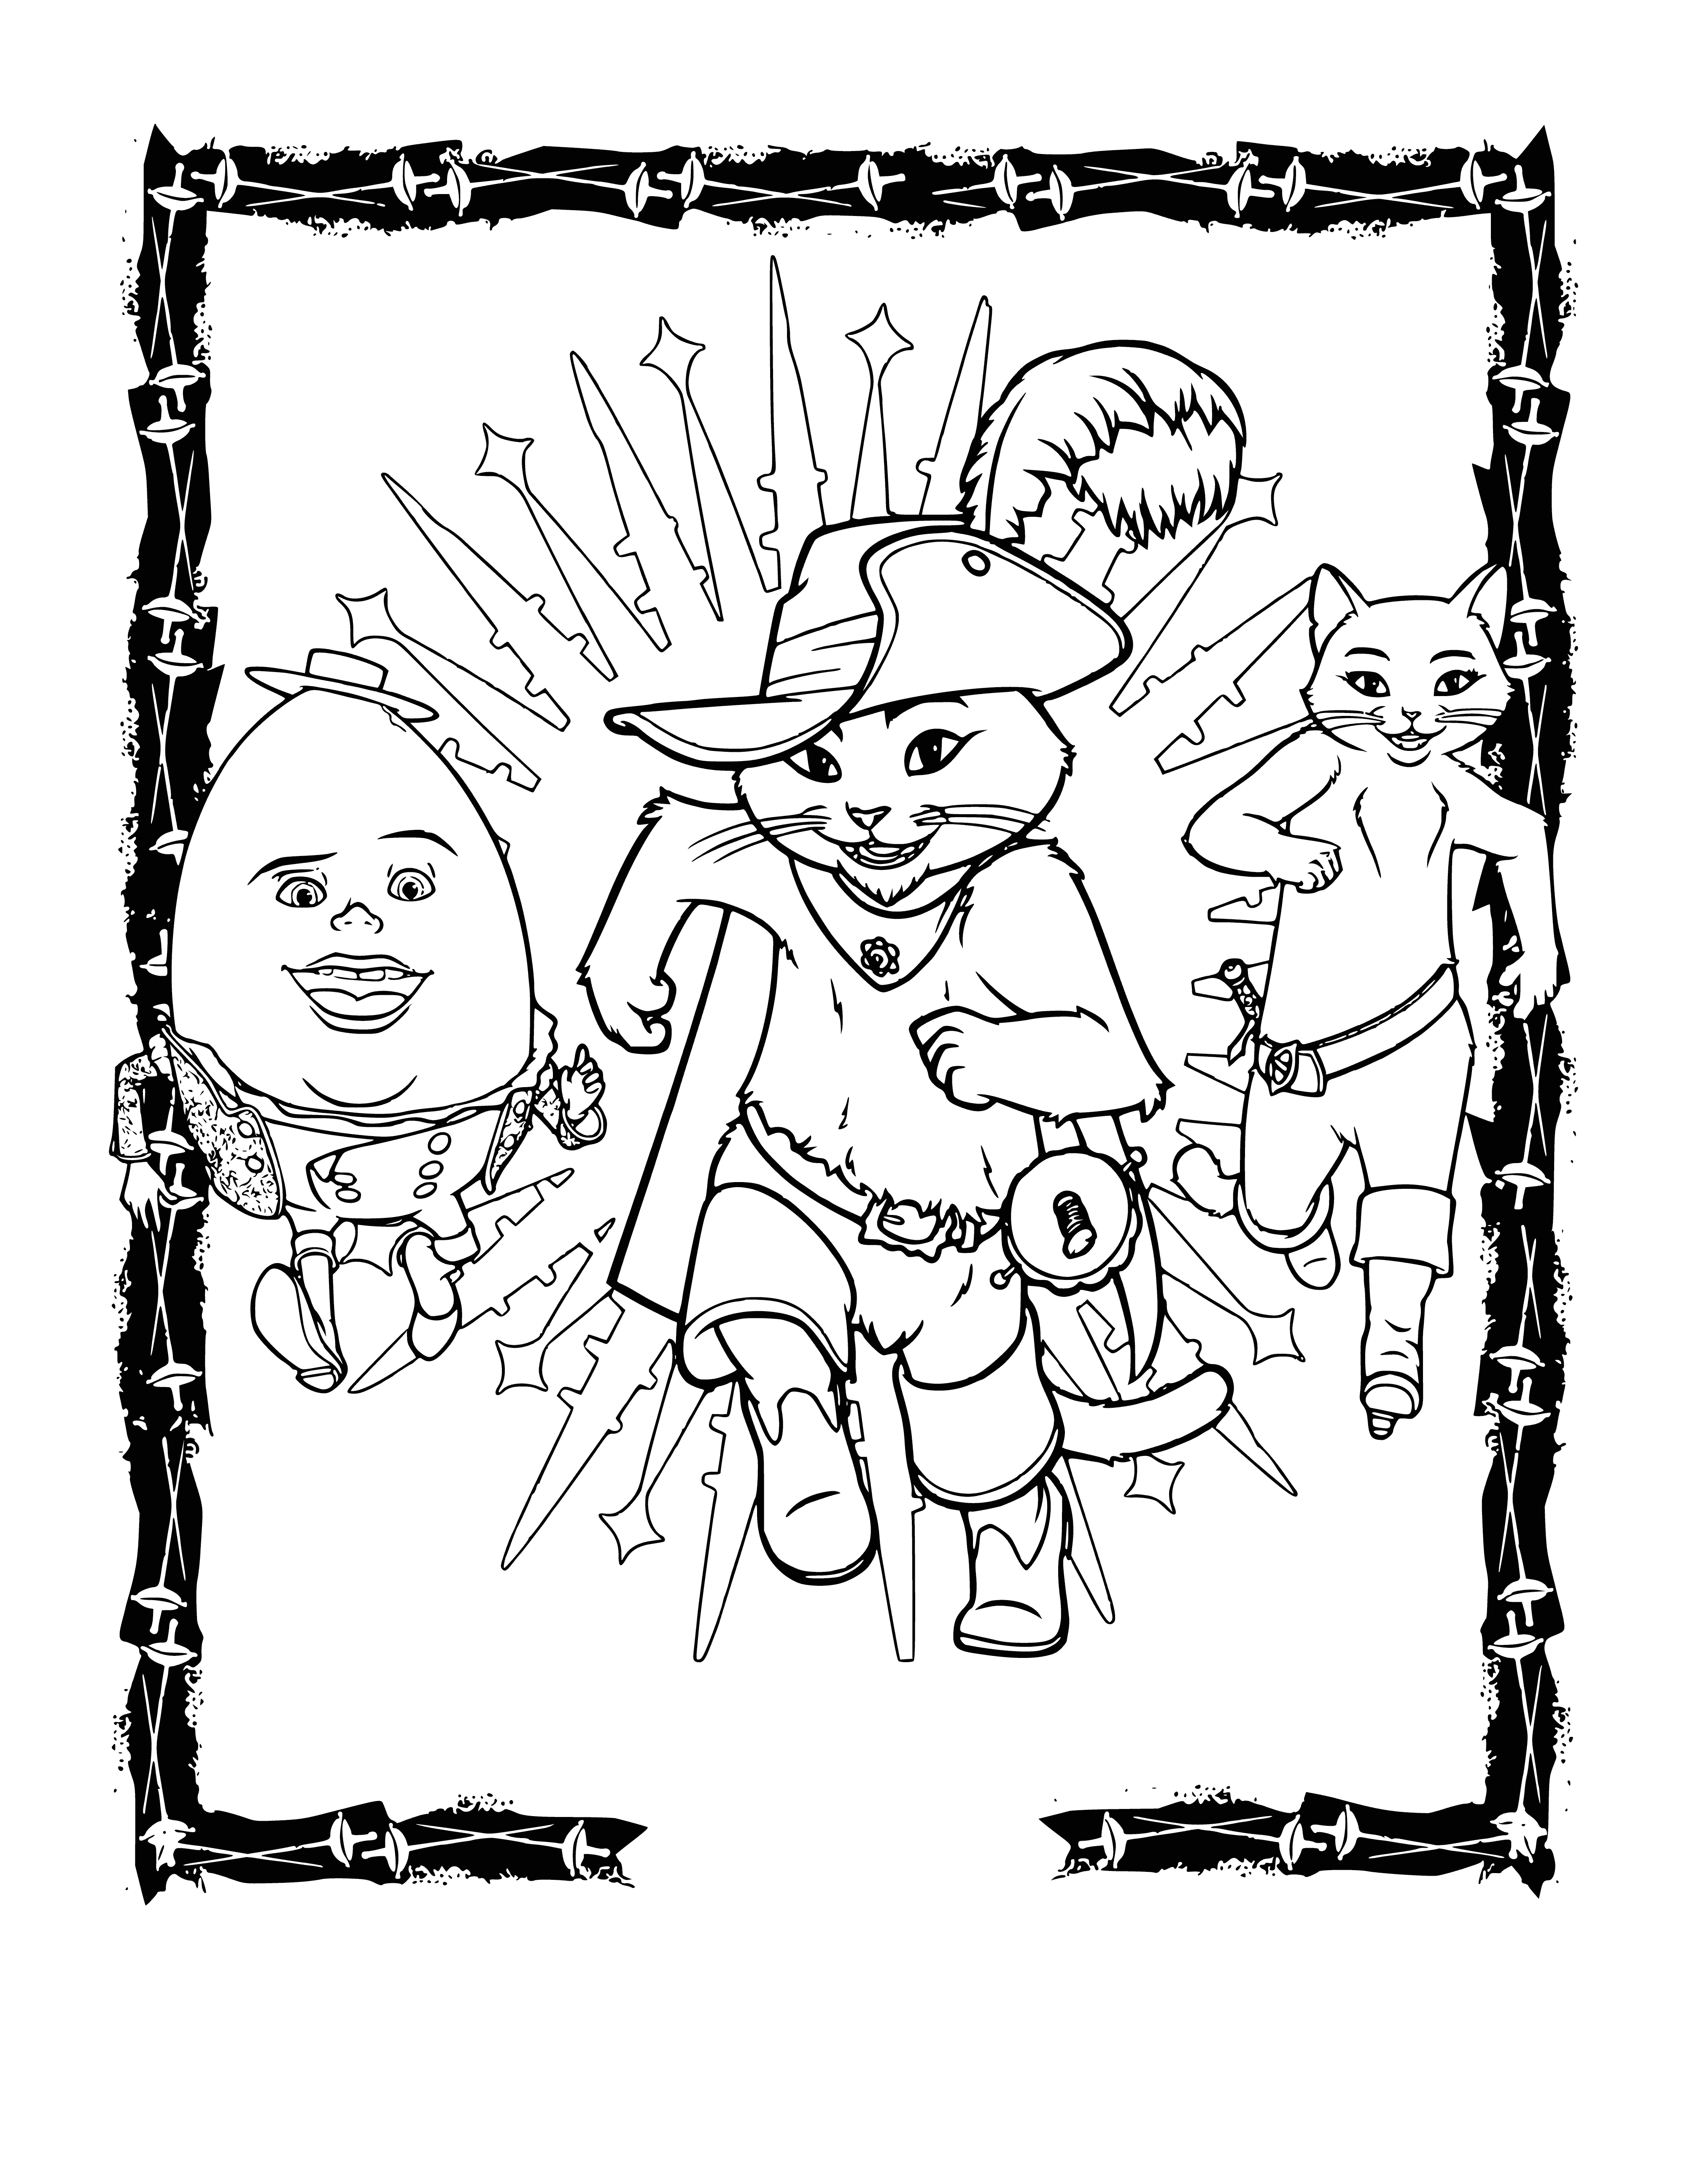 Puss in Boots coloring page